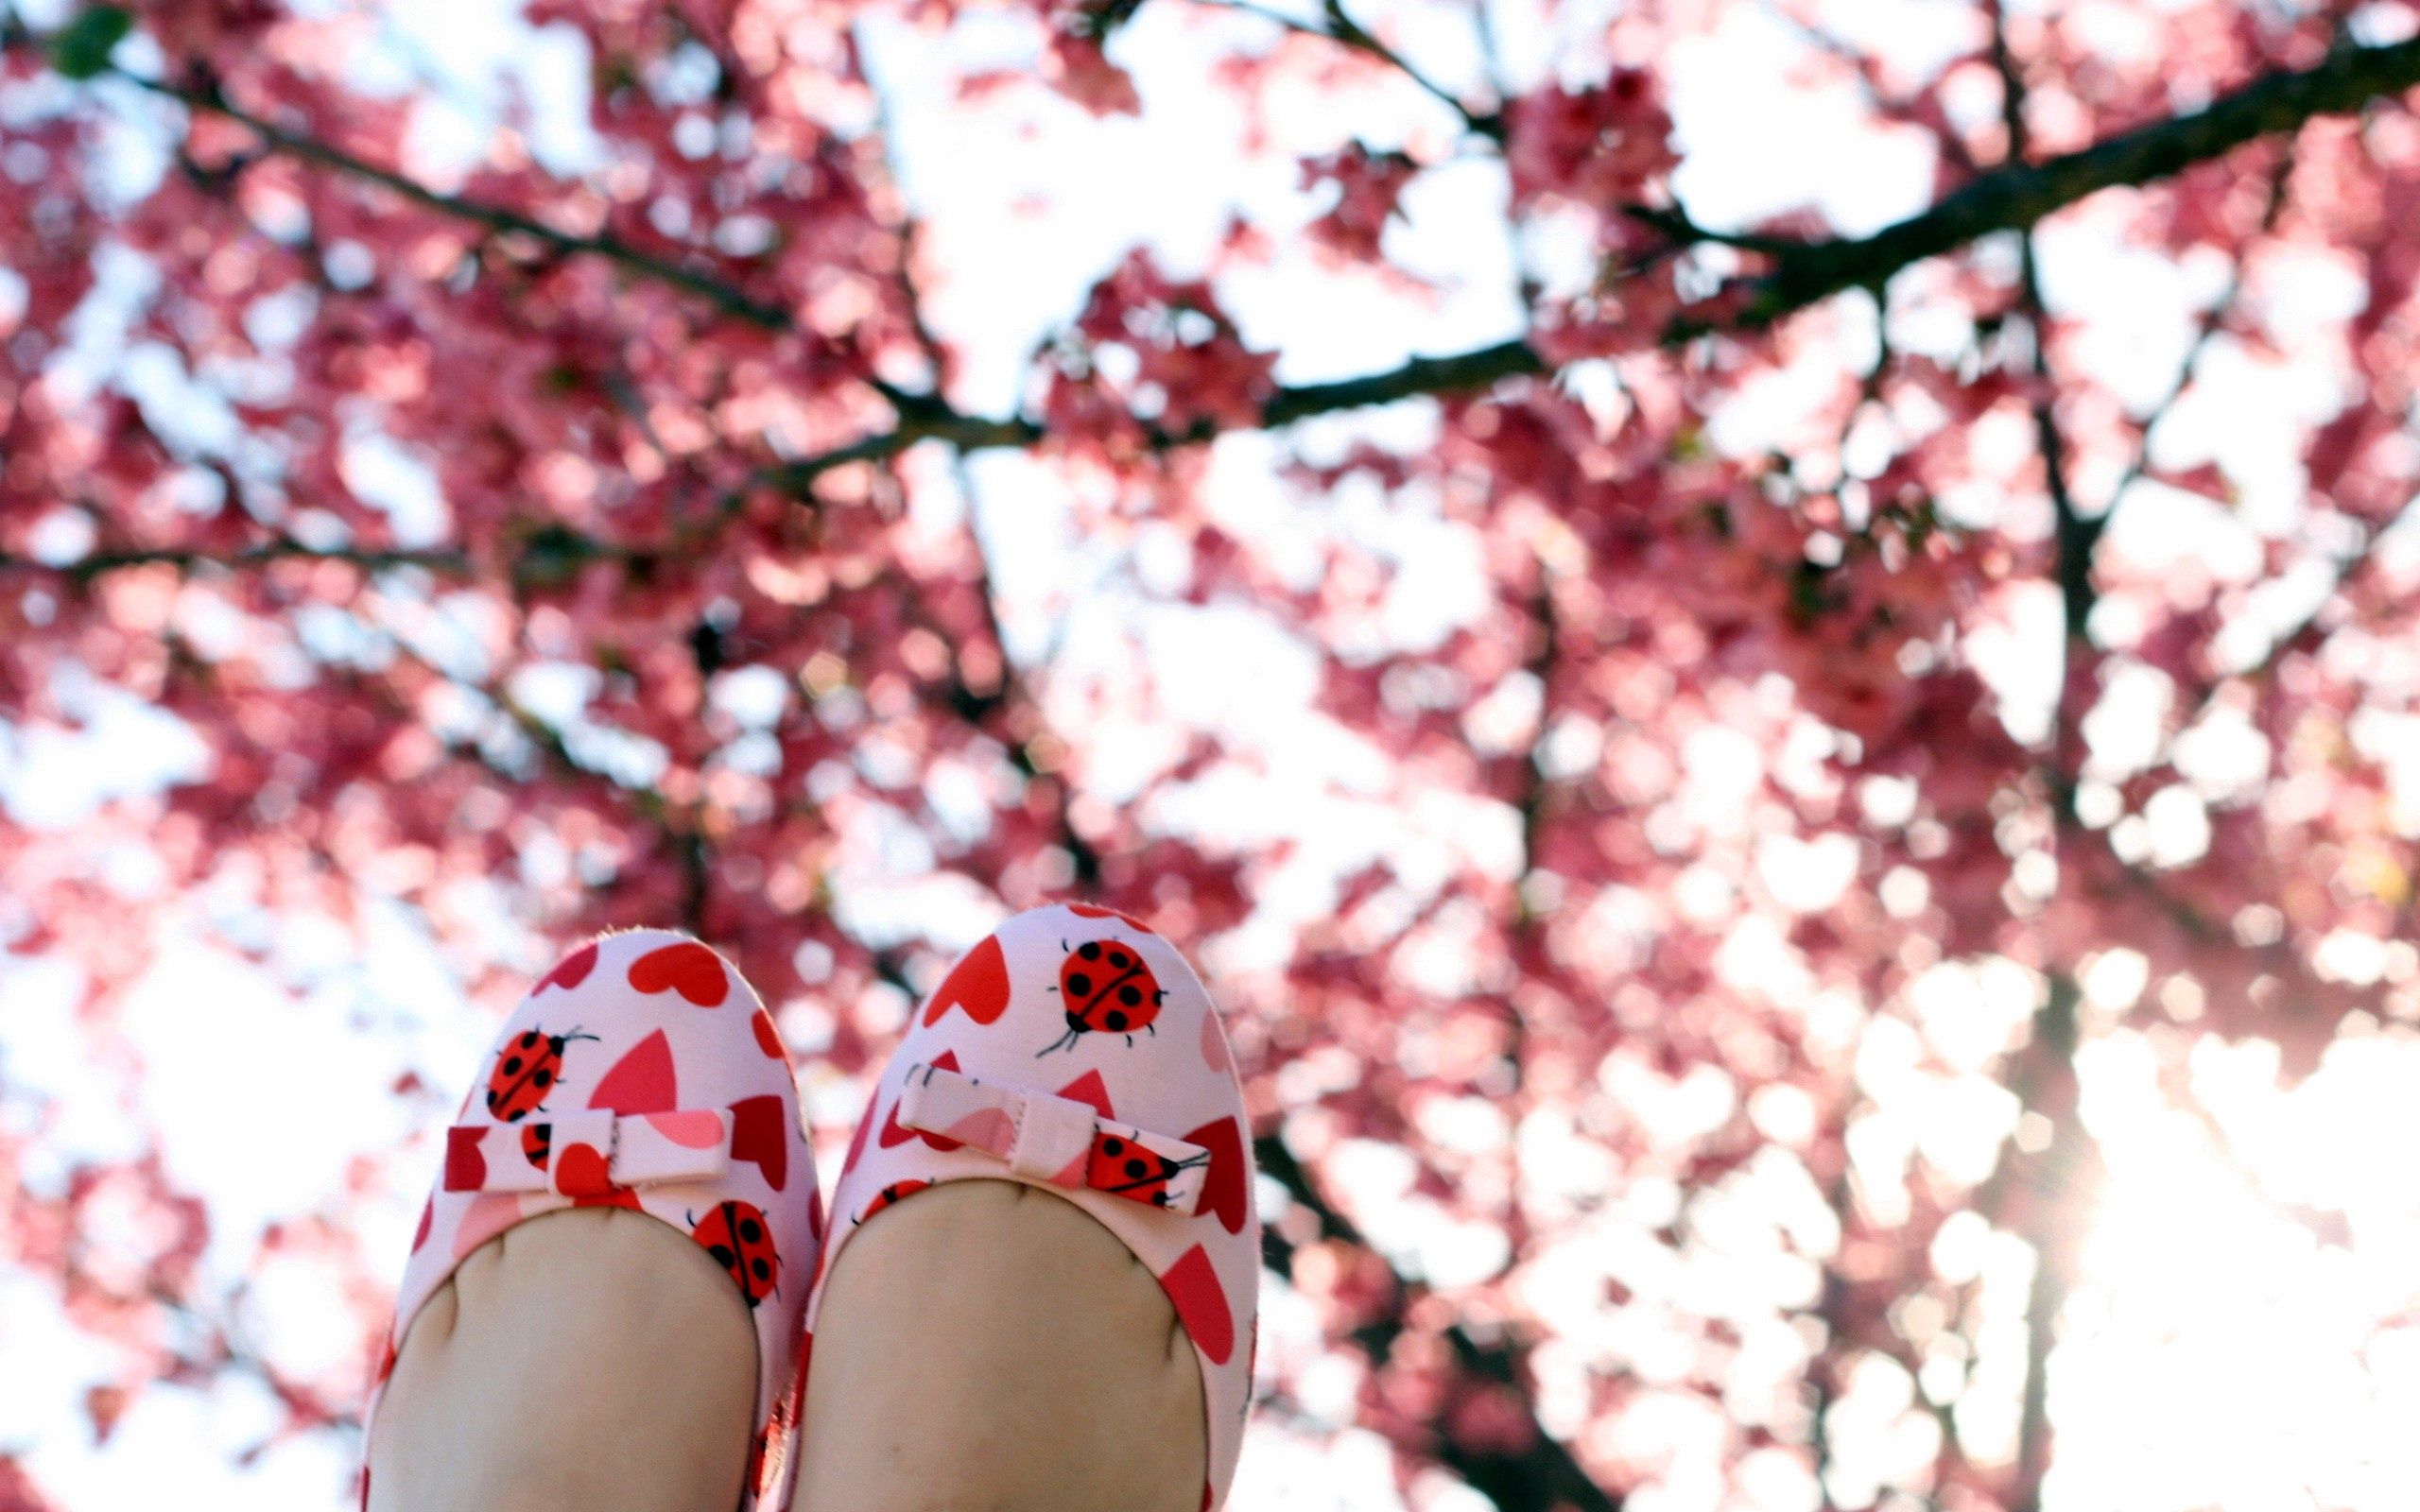 Phone Background Full HD tree, slippers, miscellanea, miscellaneous